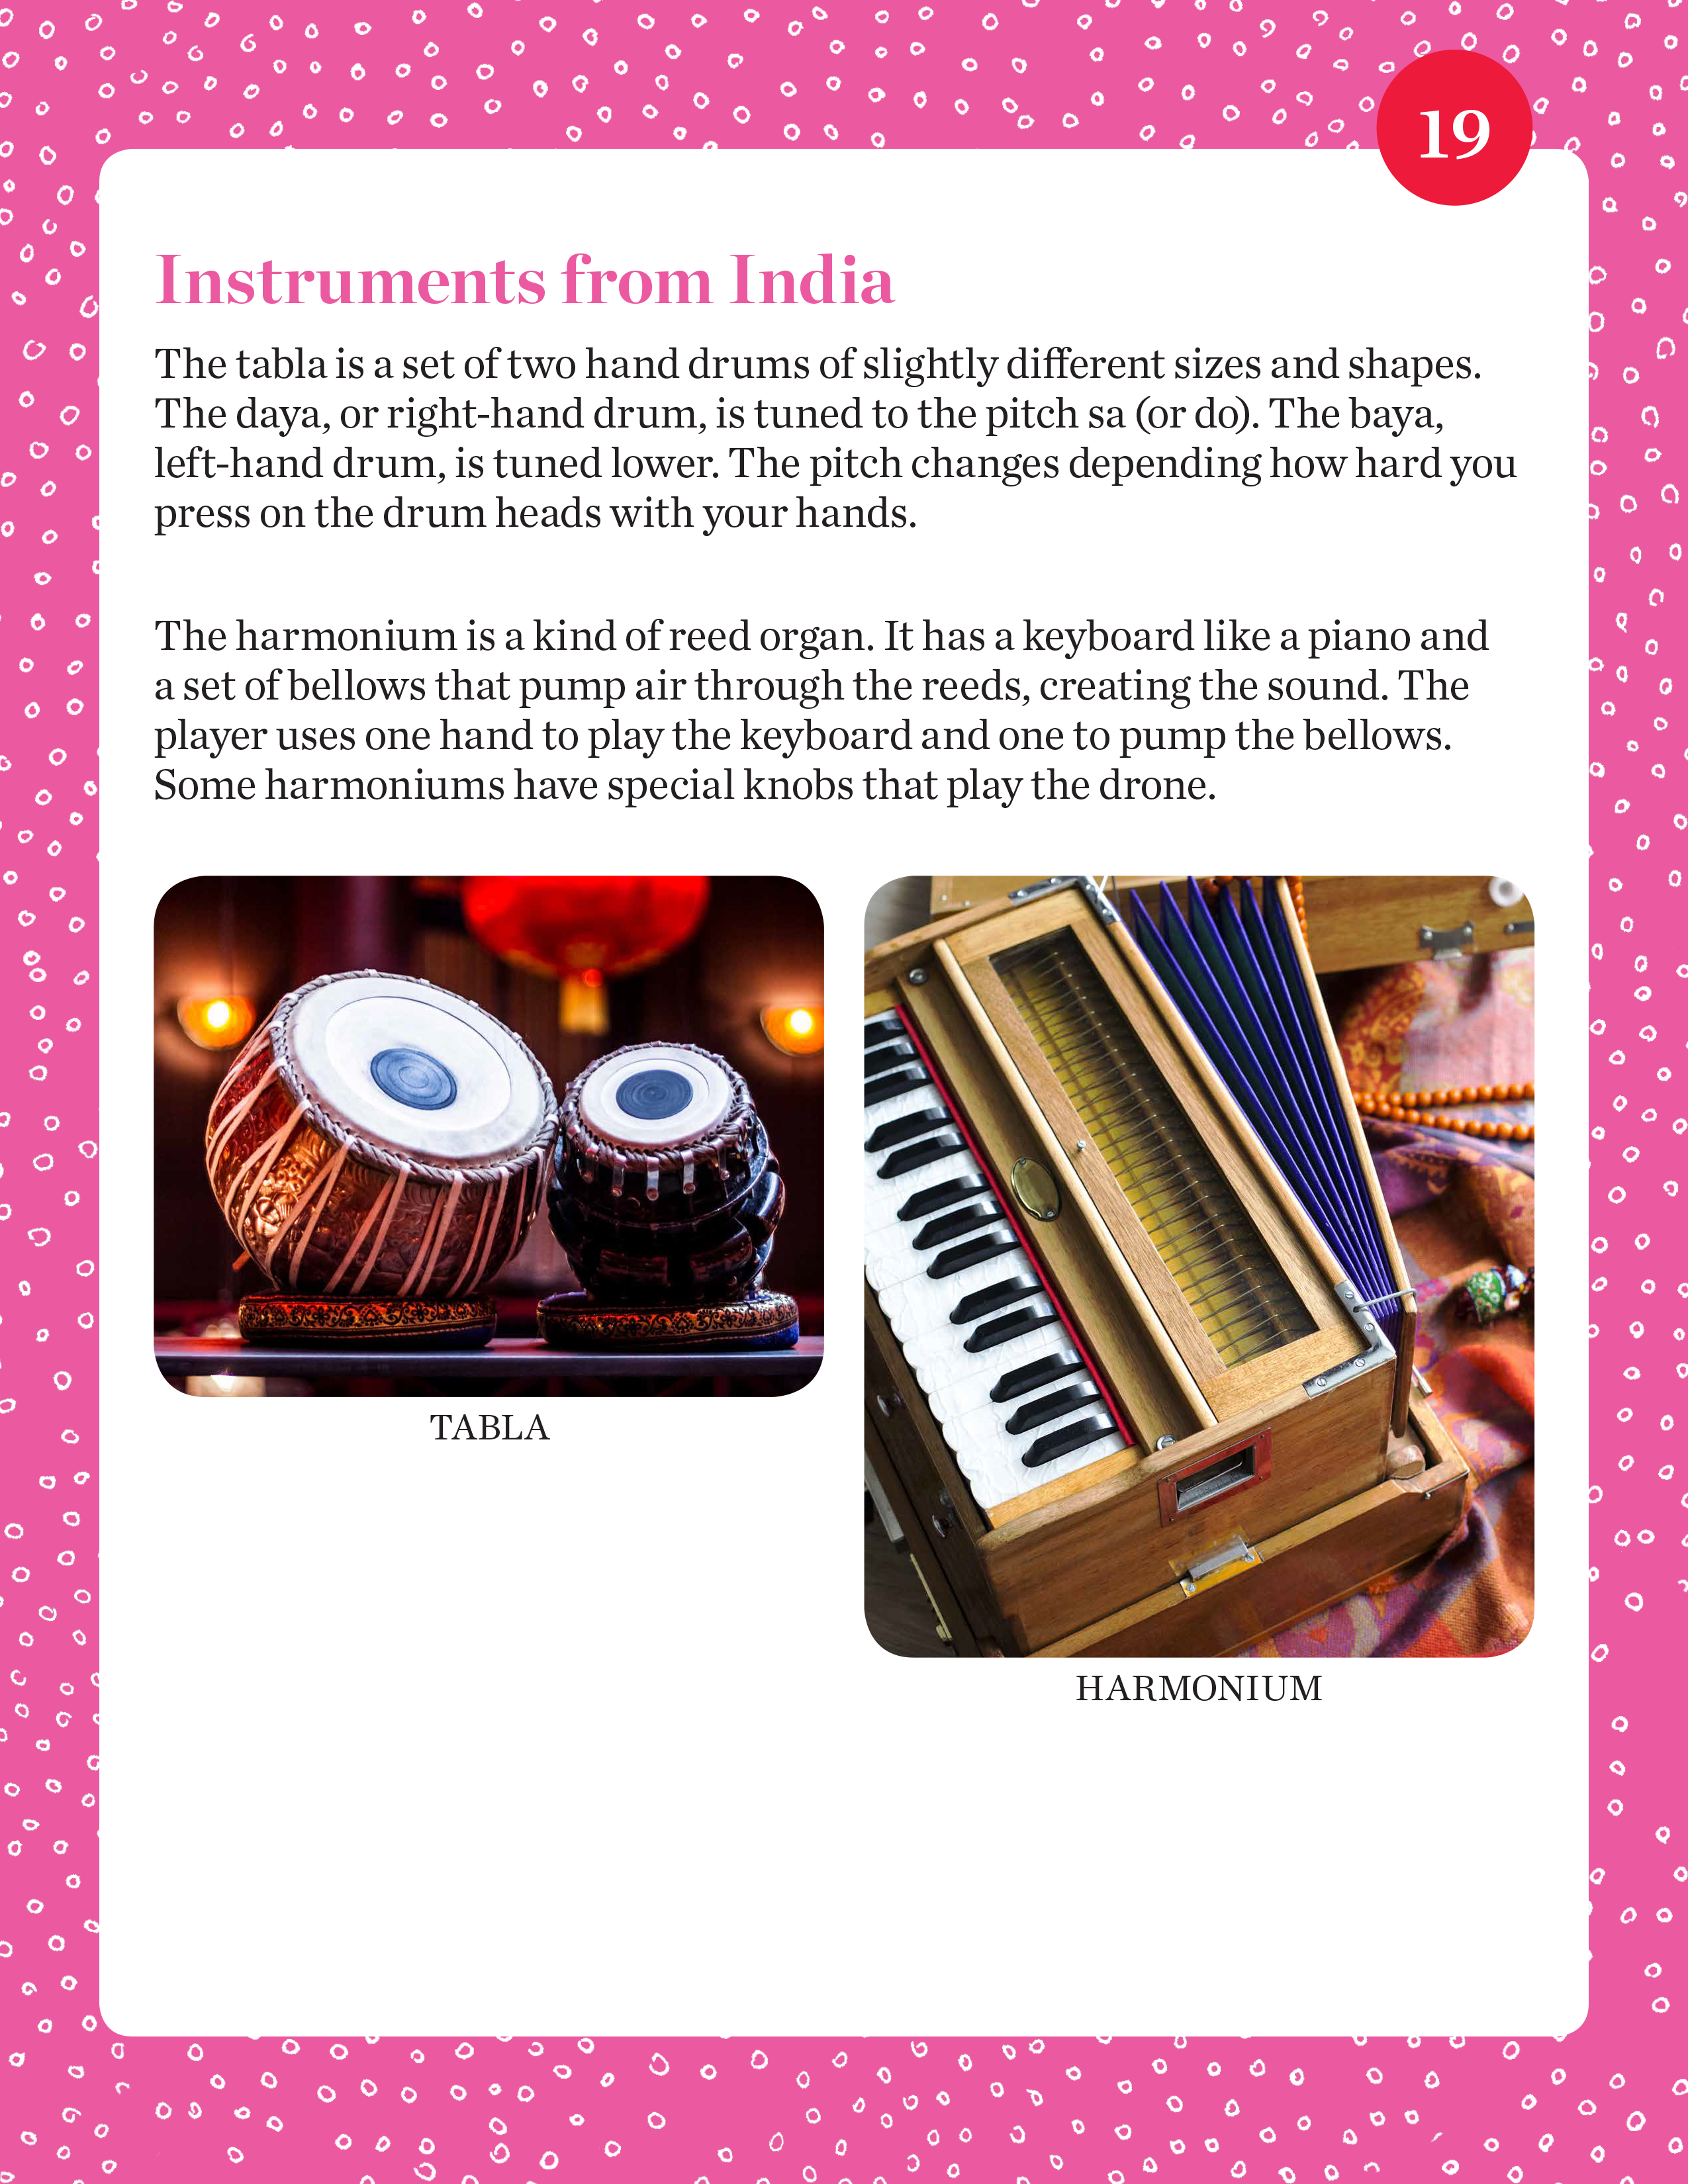 Instruments from India